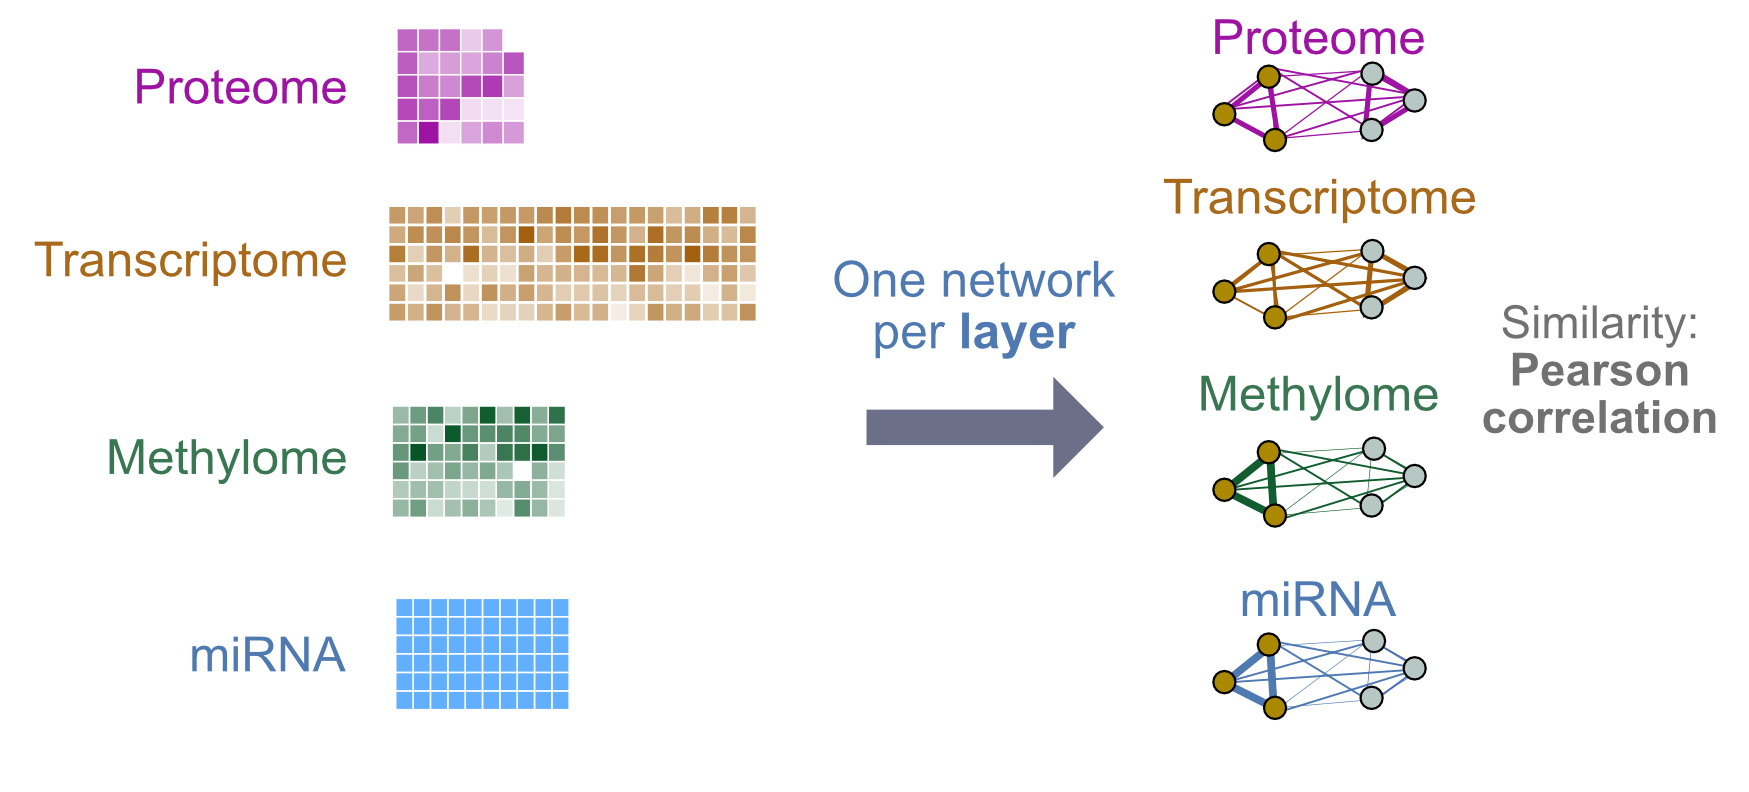 Lab 1 design: We will integrate four layers of genomic data. Each layer will be converted into a single patient similarity network using Pearson correlation for pairwise similarity. 